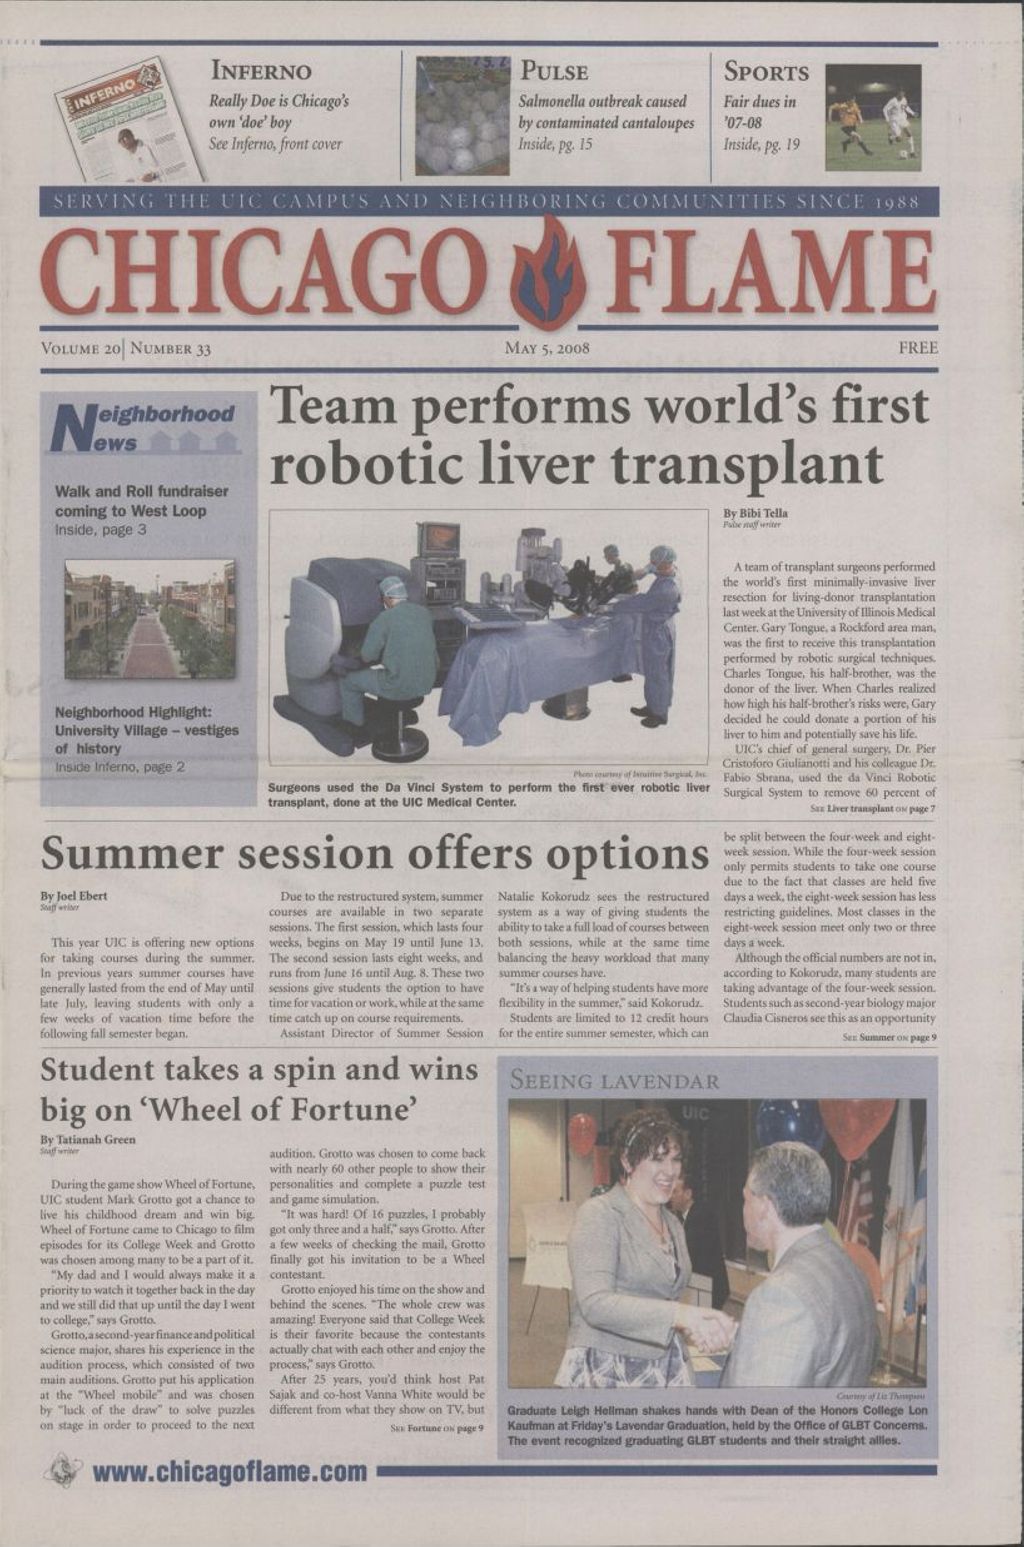 Miniature of Chicago Flame (May 5, 2008)